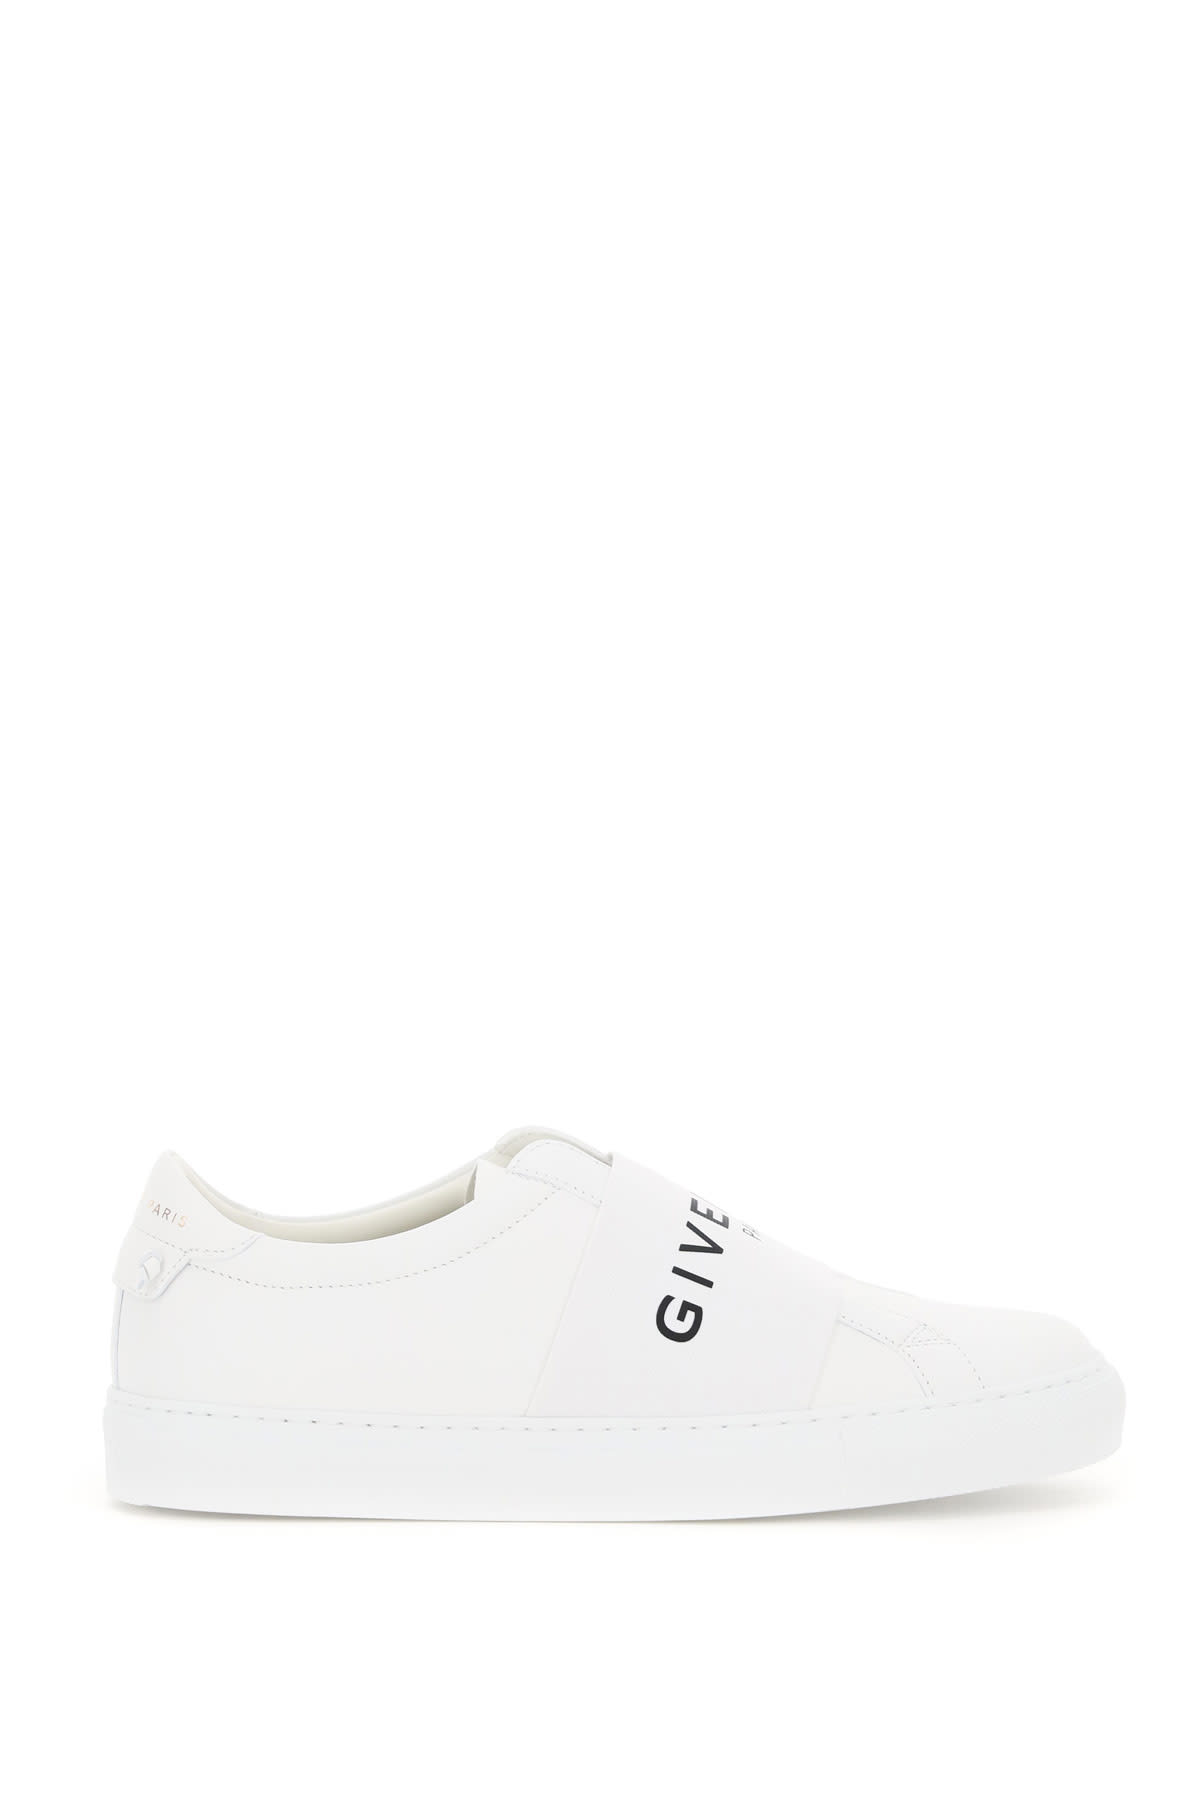 Givenchy Urban Street Sneakers With Elastic Band